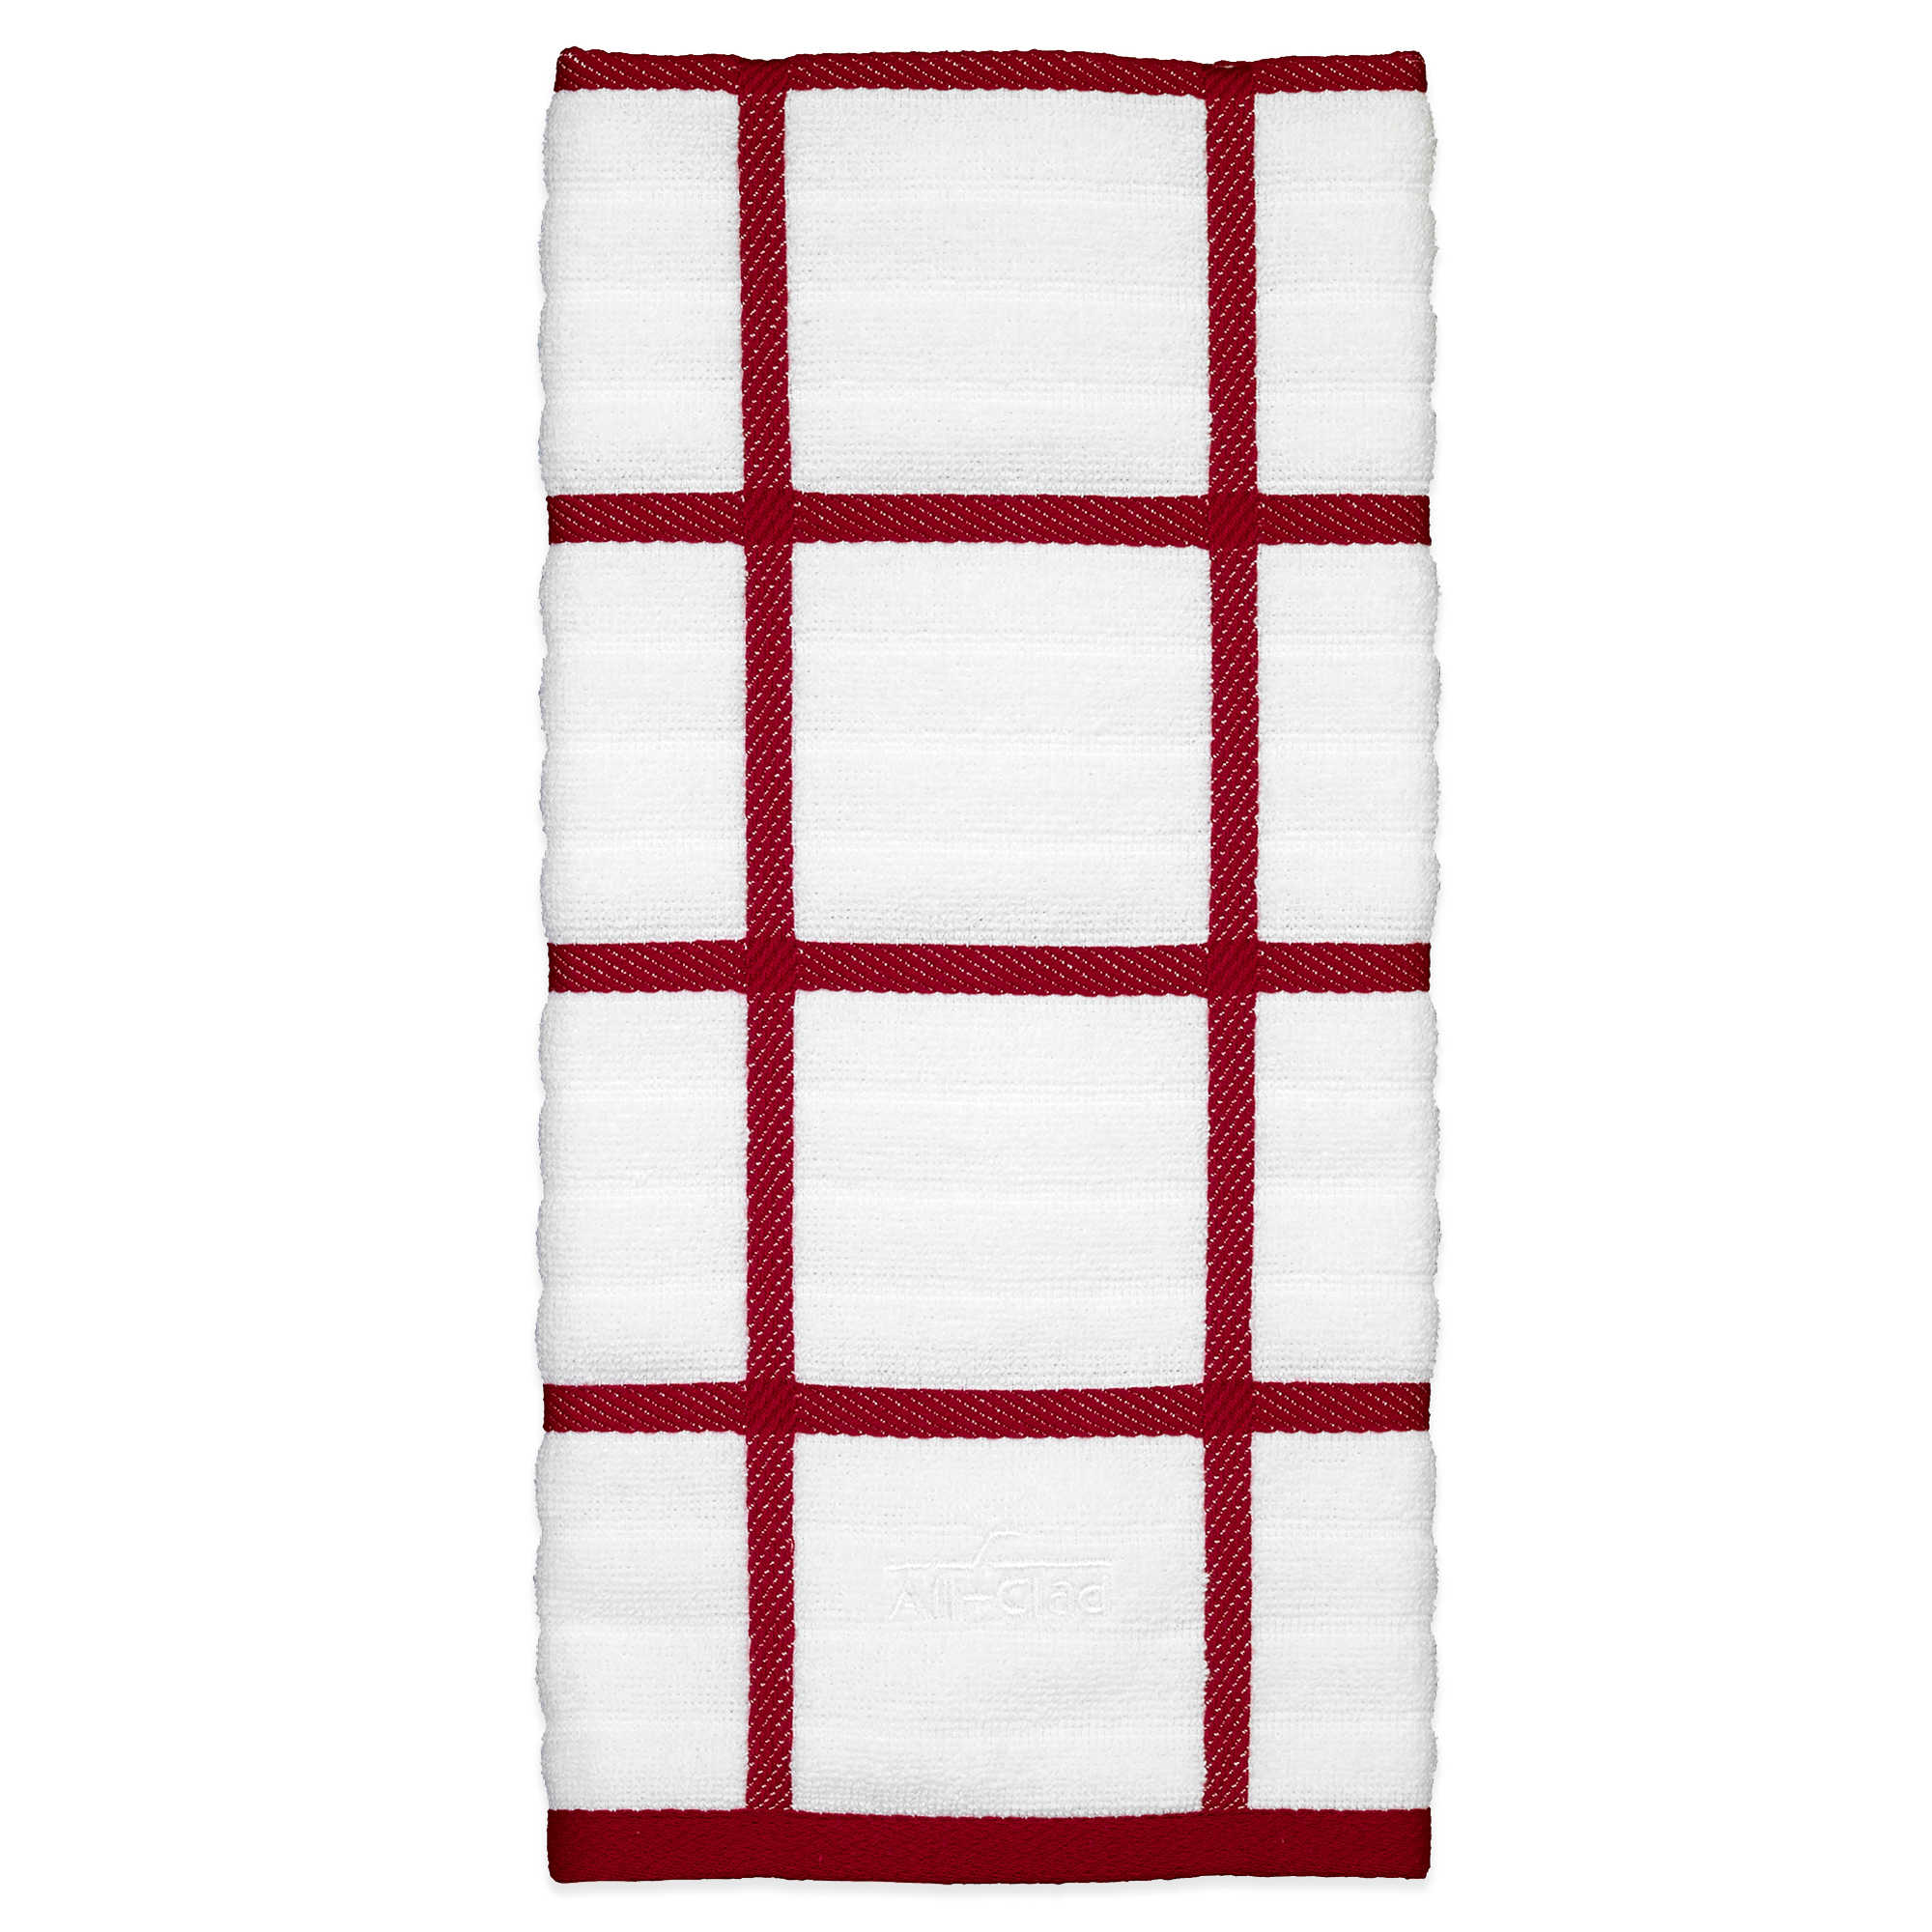 All-Clad Chili Solid Kitchen Towel